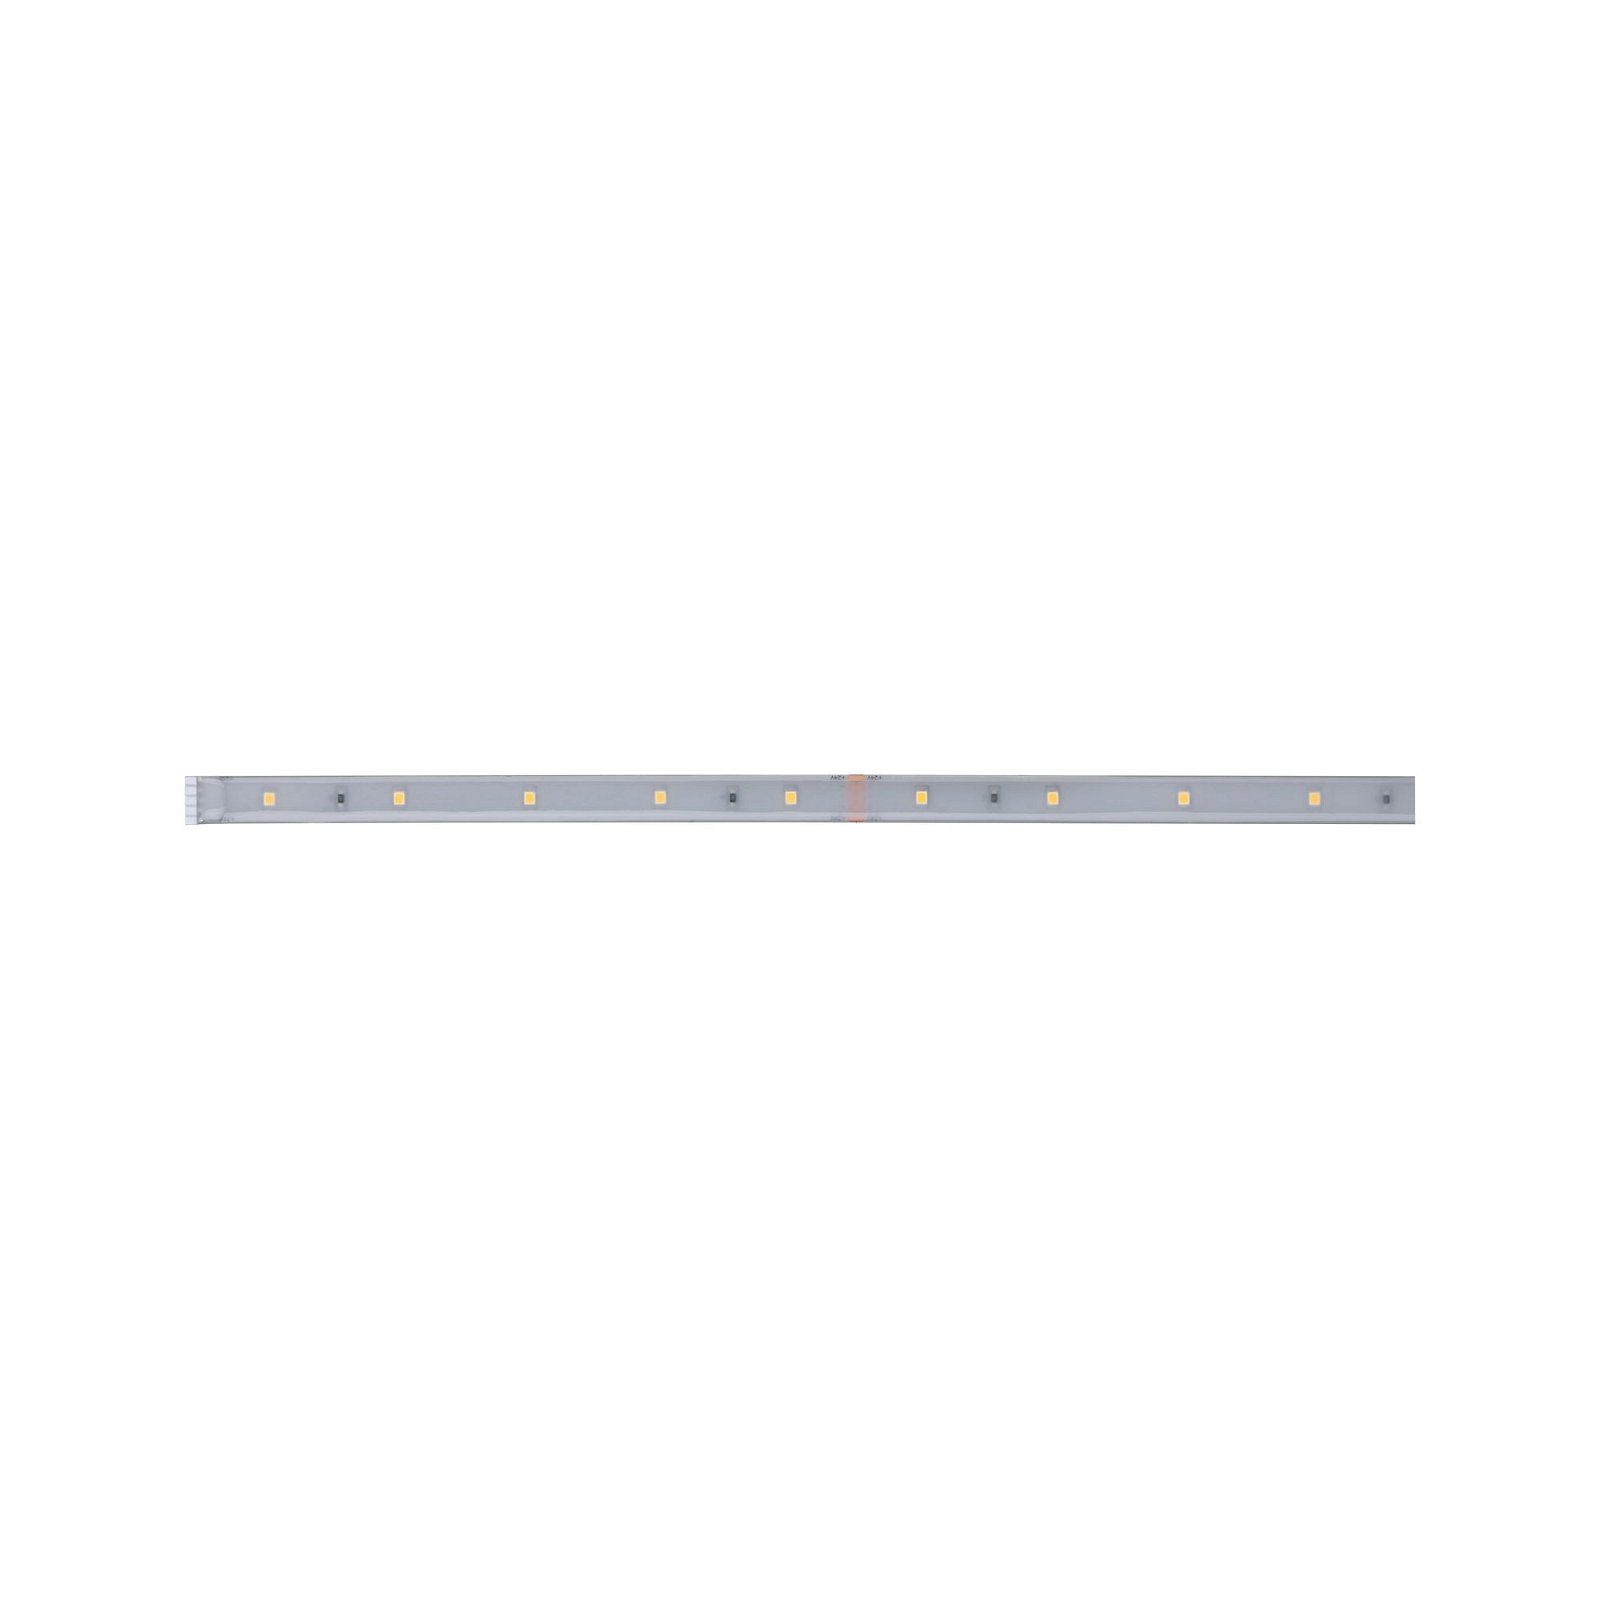 MaxLED 250 LED Strip Warm white Individual strip 1m protect cover IP44 4W 240lm/m 2700K